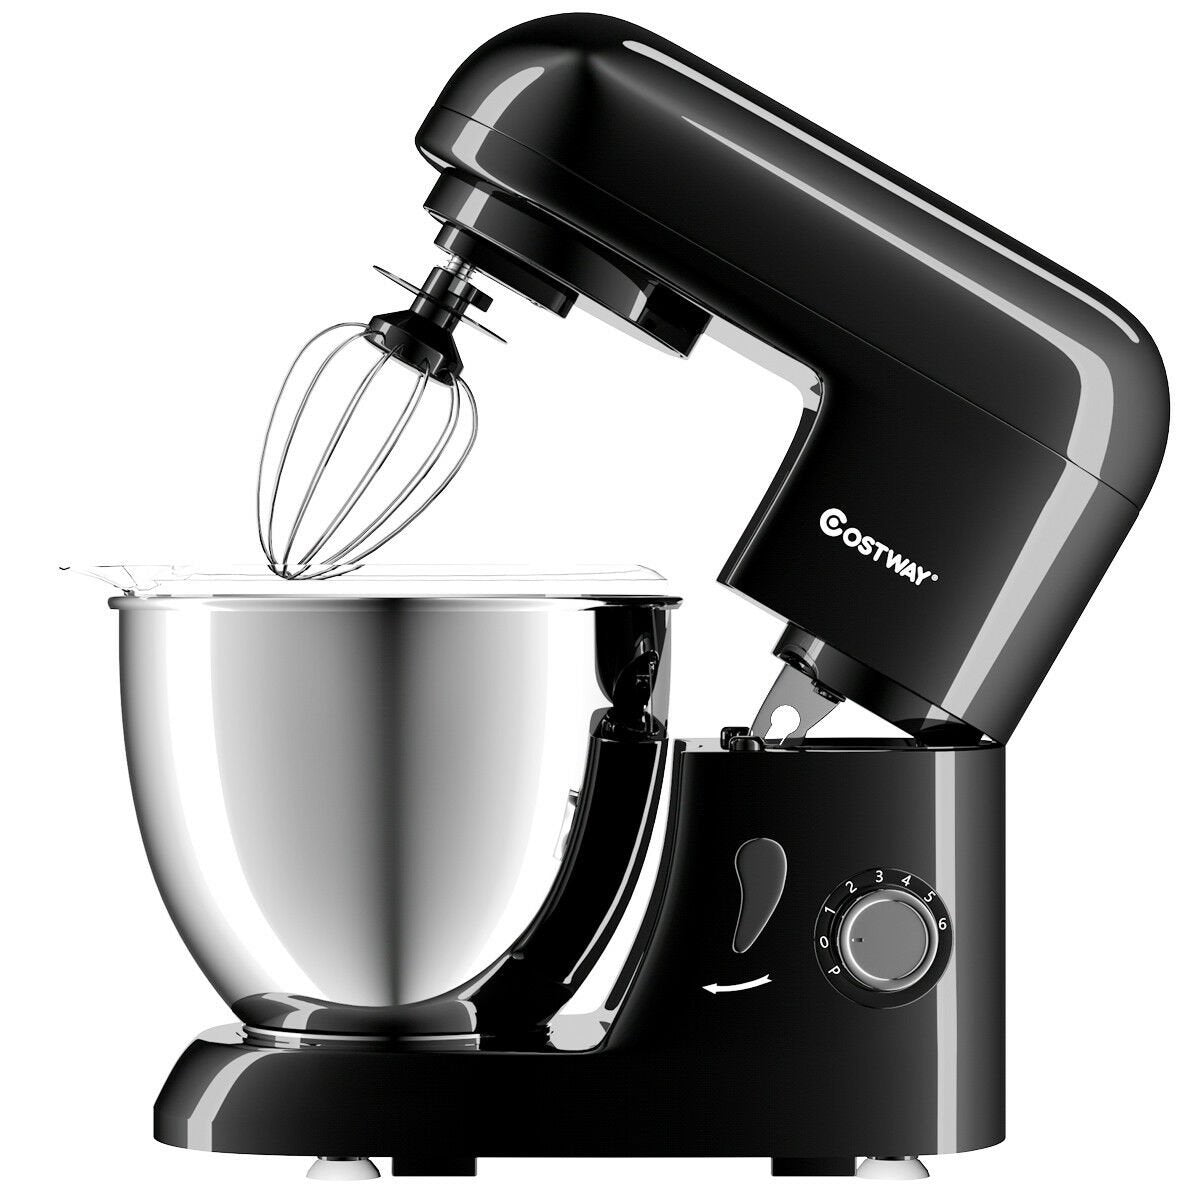 4.3 Qt 550 W Tilt-Head Stainless Steel Bowl Electric Food Stand Mixer, Black - Gallery Canada